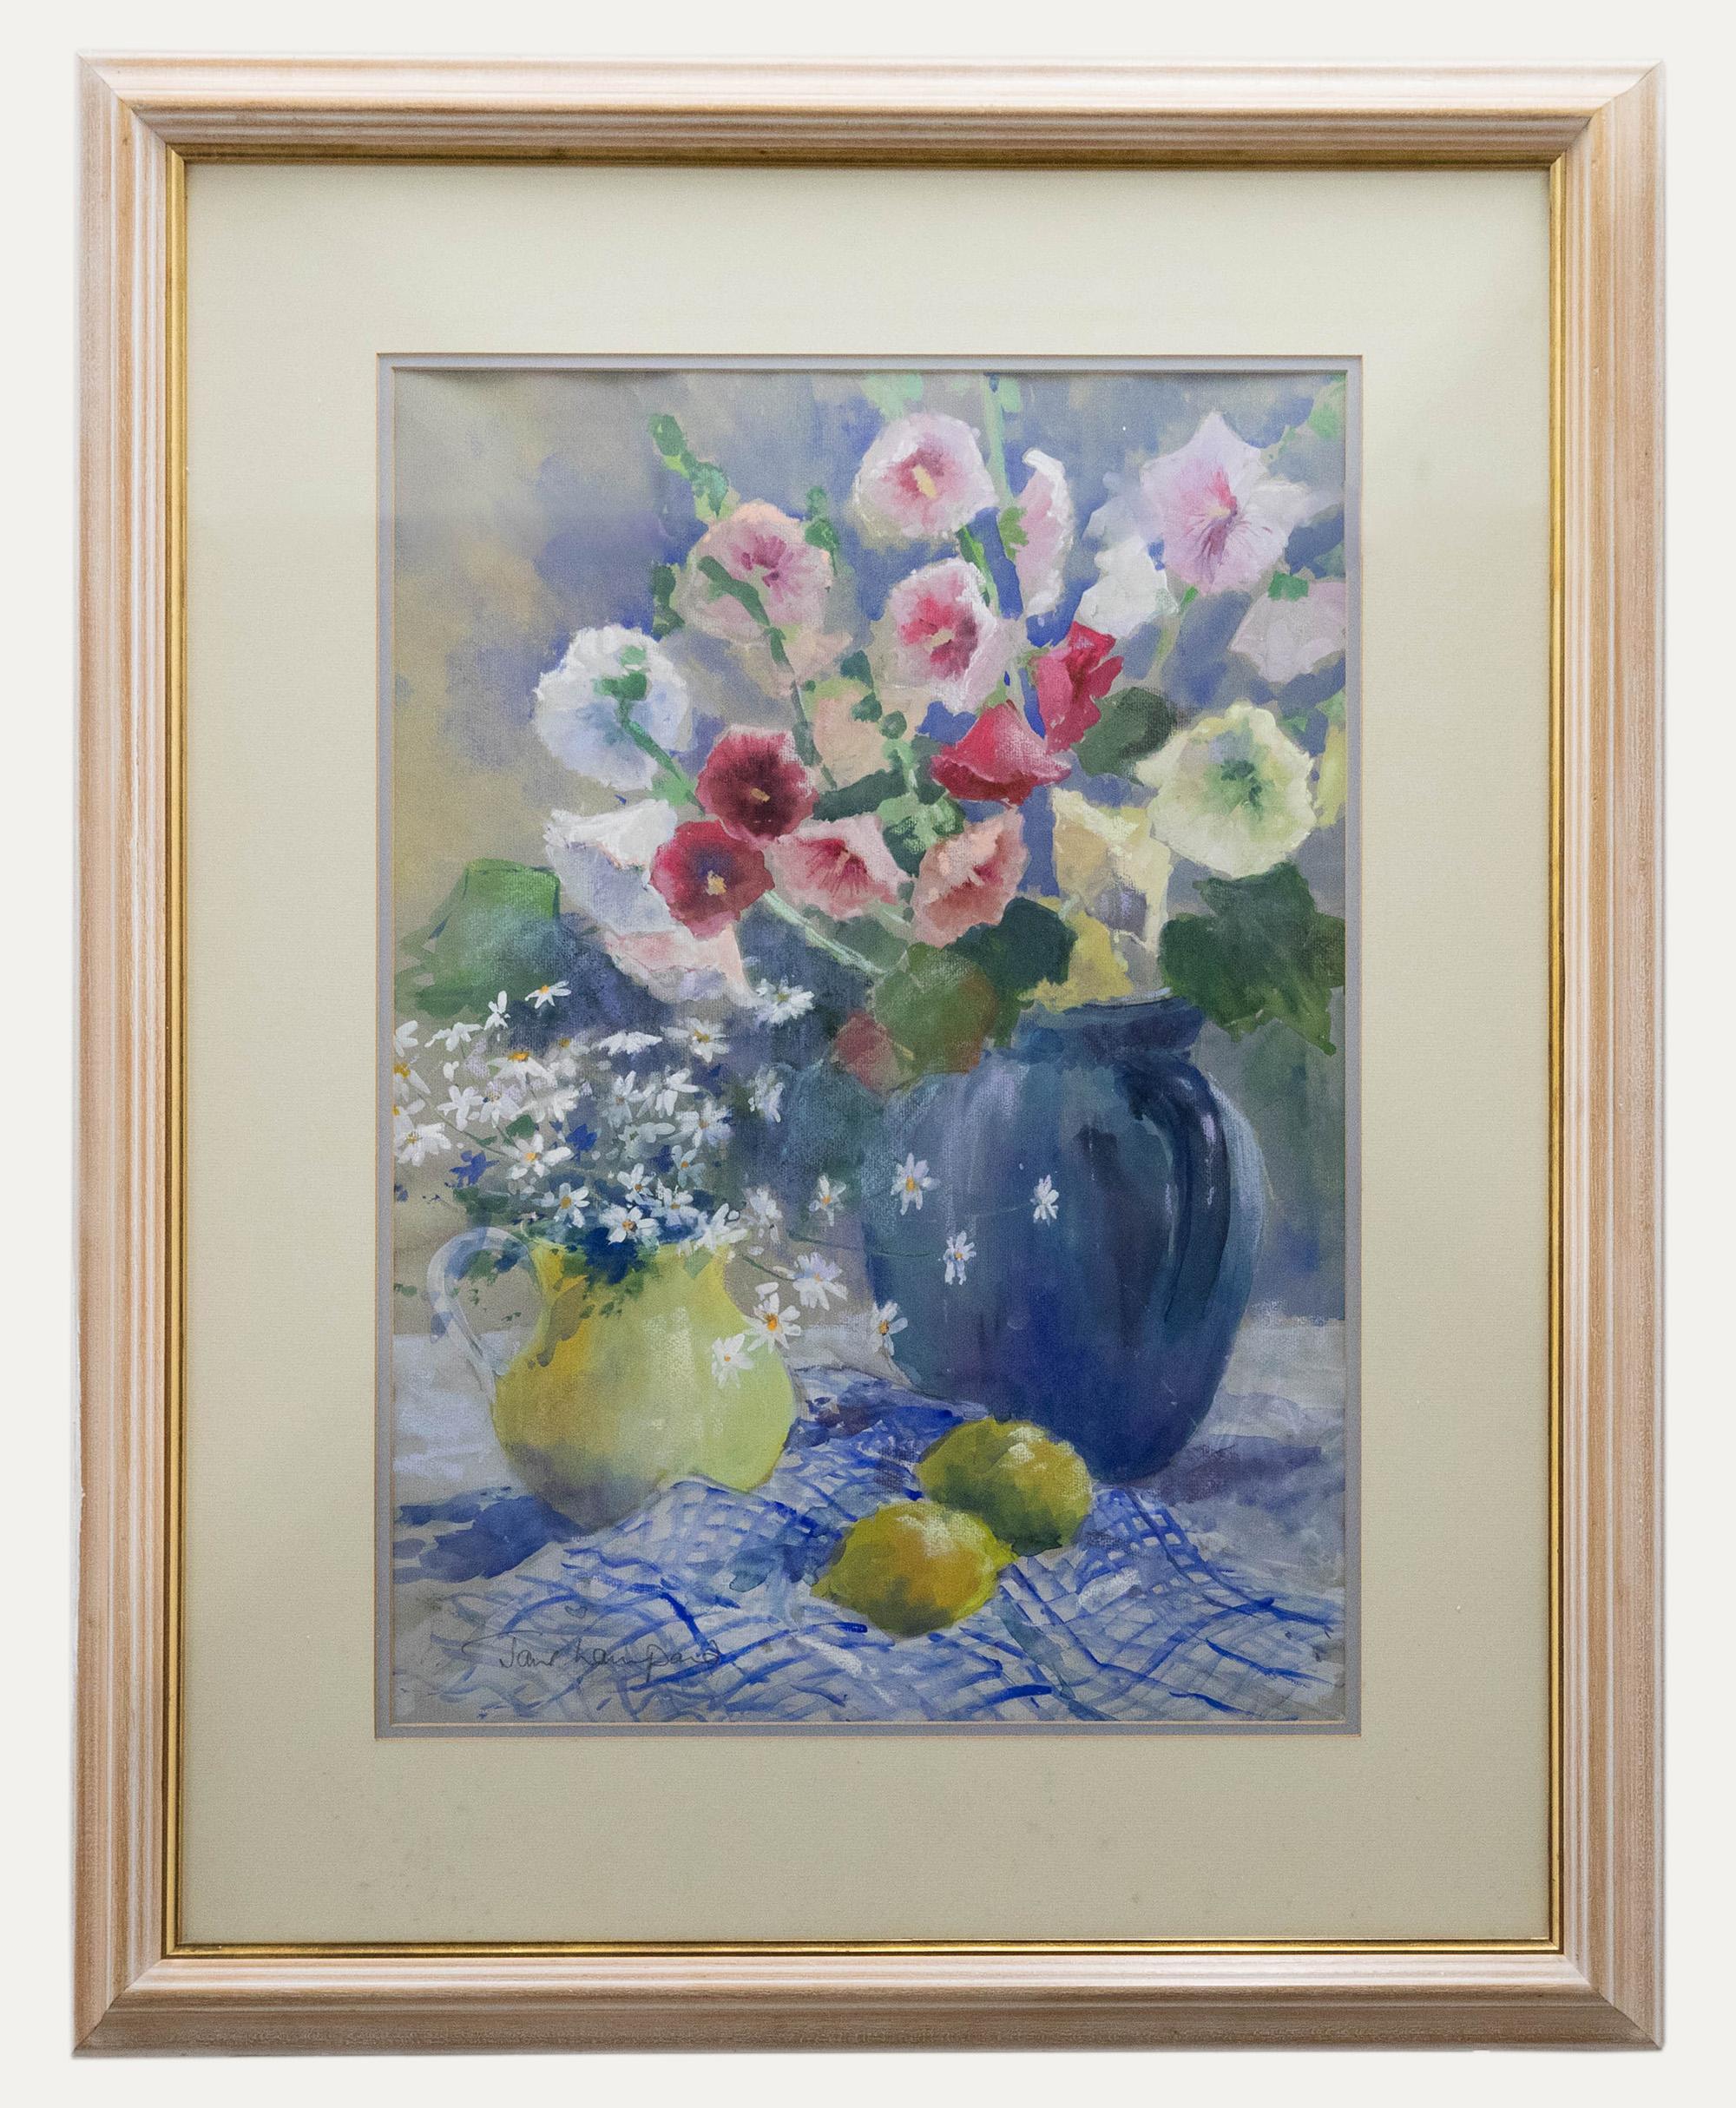 Jane Lampard - Framed Contemporary Mixed Media, Jugs of Flowers and Lemons - Mixed Media Art by Unknown